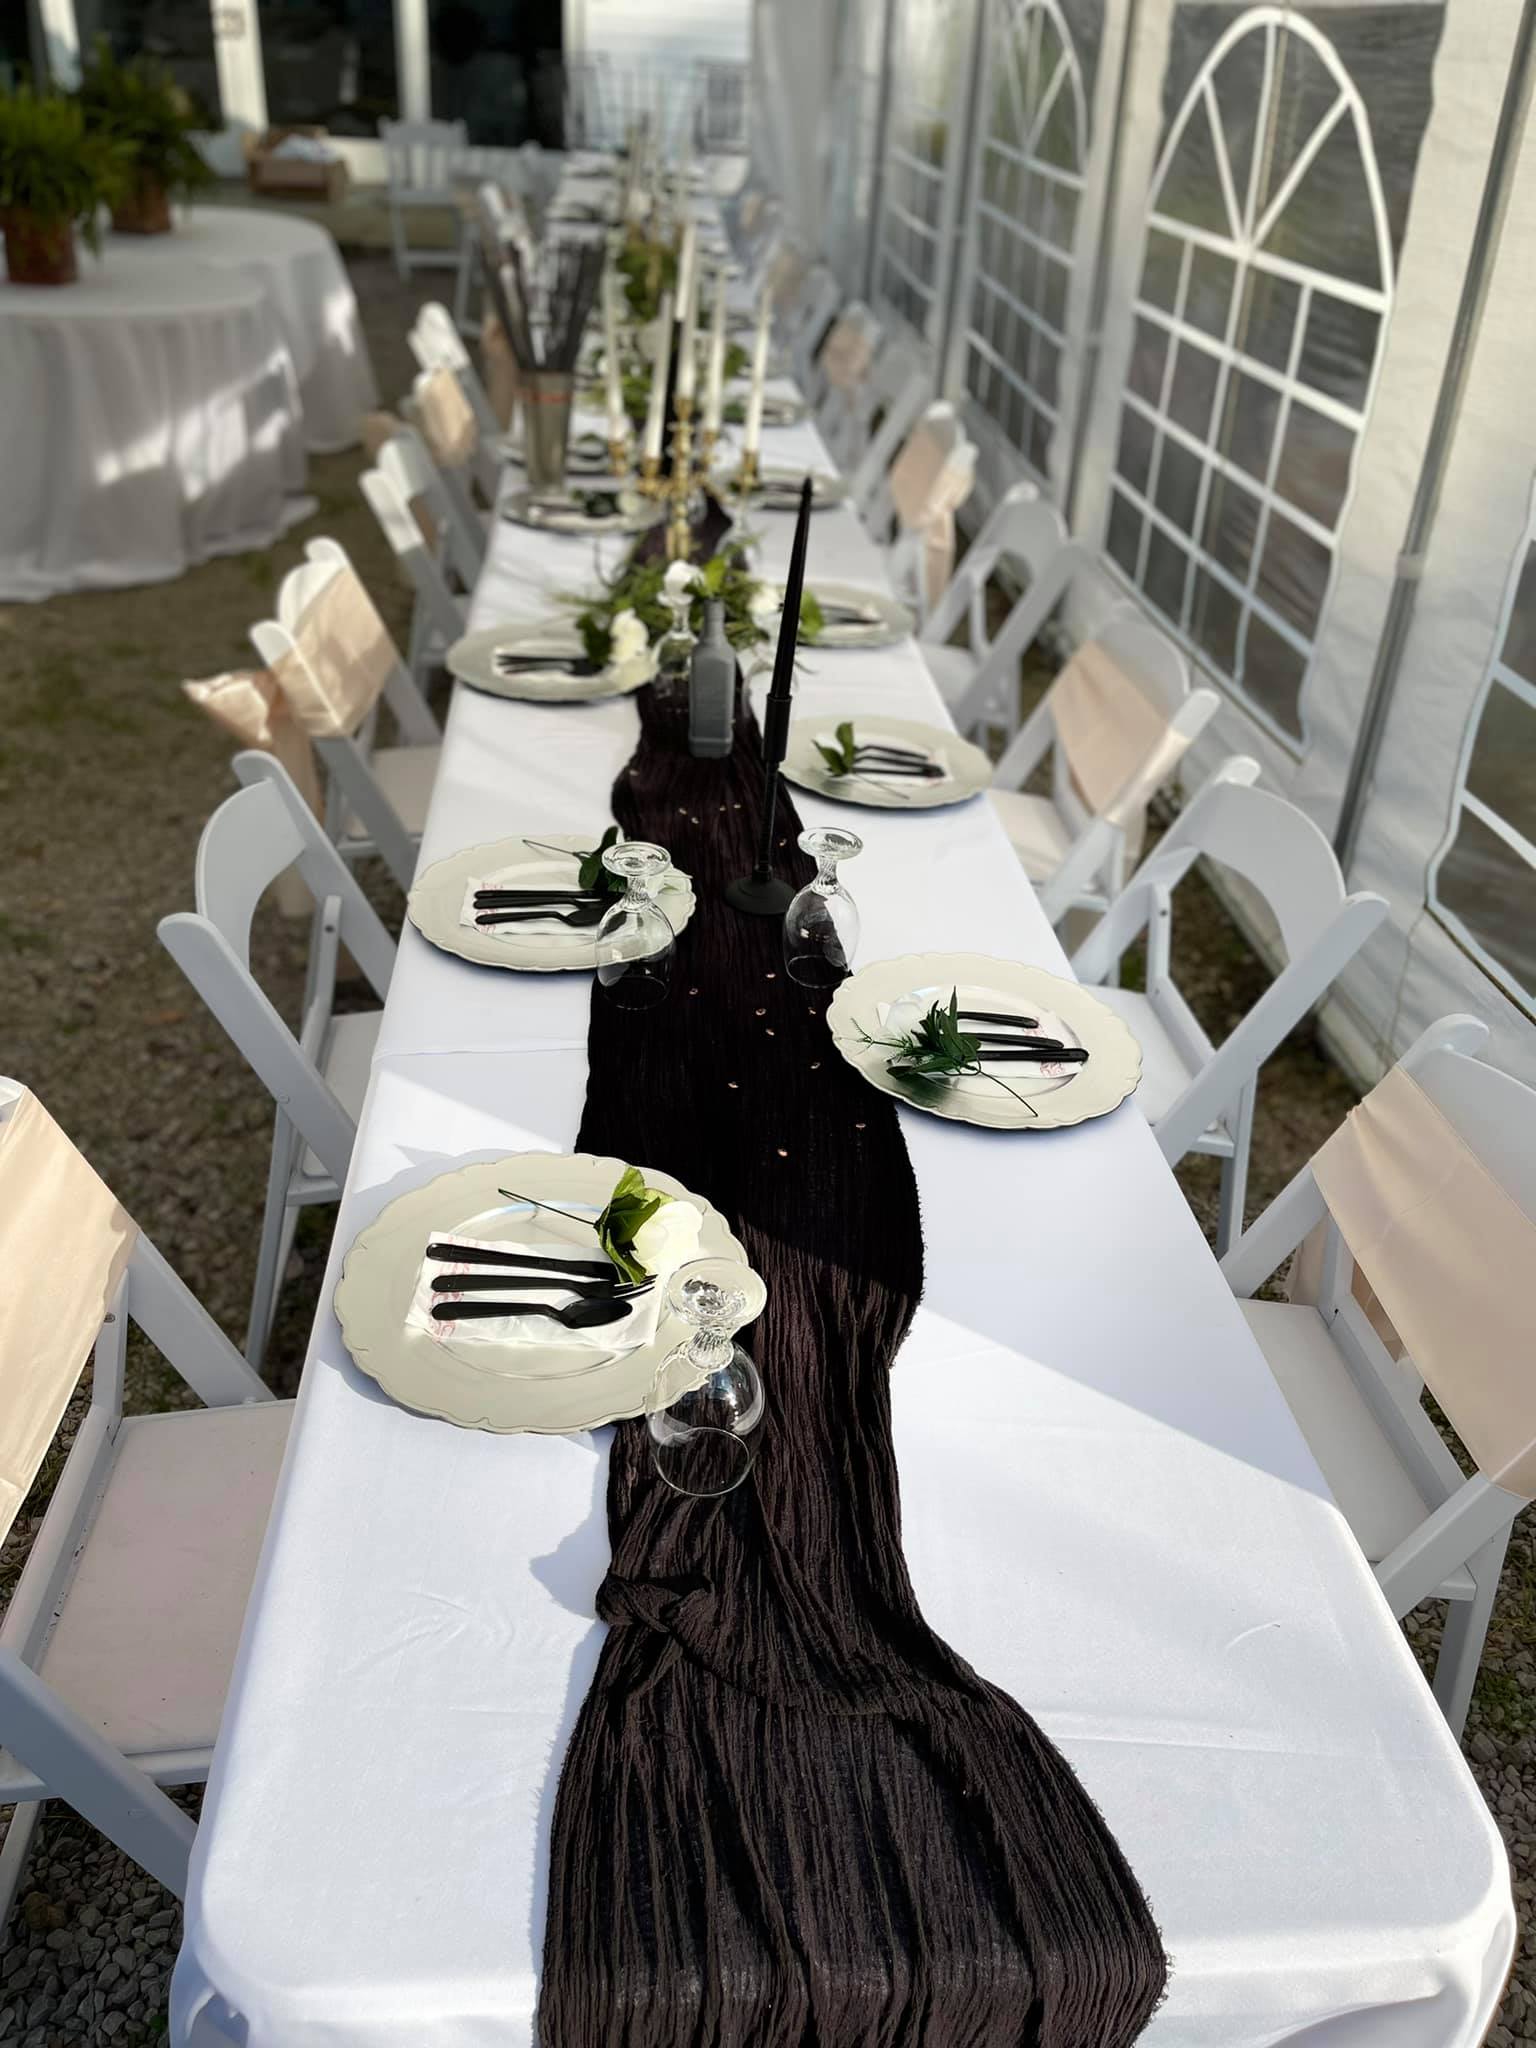 Photo of lon tale at reception with black table runner on white tablecloth candle centerpieces along the entire banquet and place settings with roses. Every other chair is wrapped with peach backing cloth